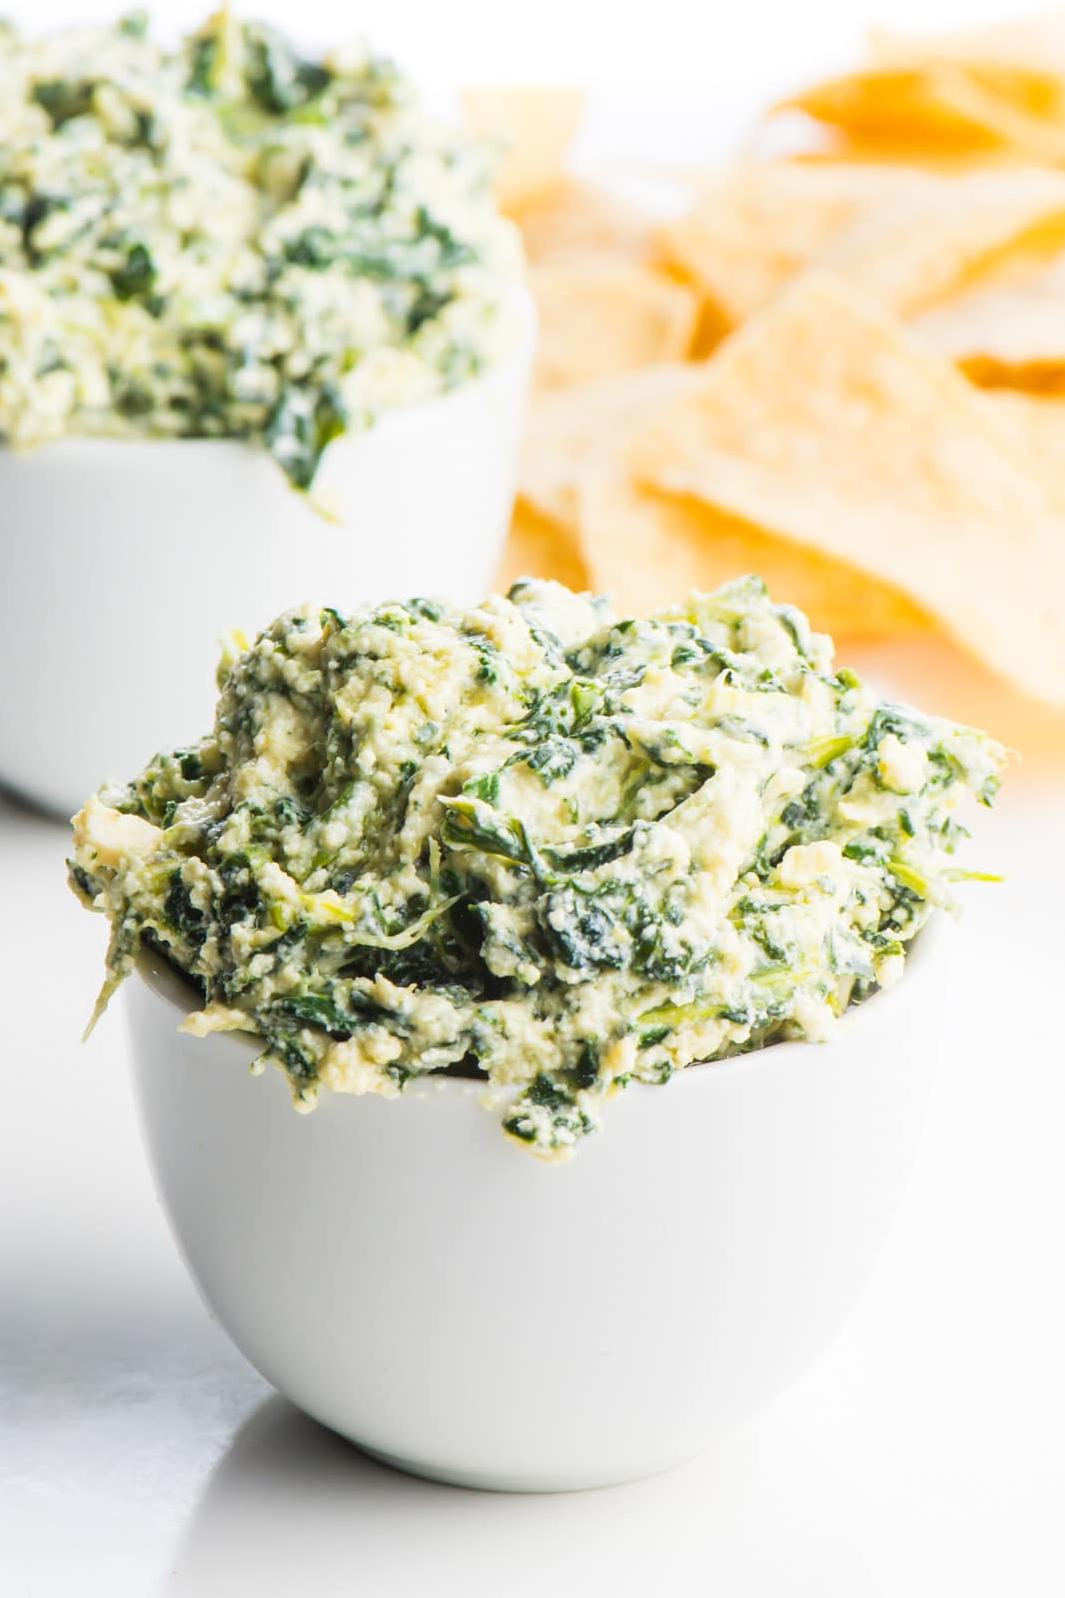  This vegan dip is so flavorful, you won't even realize it's healthy... until you go for seconds!